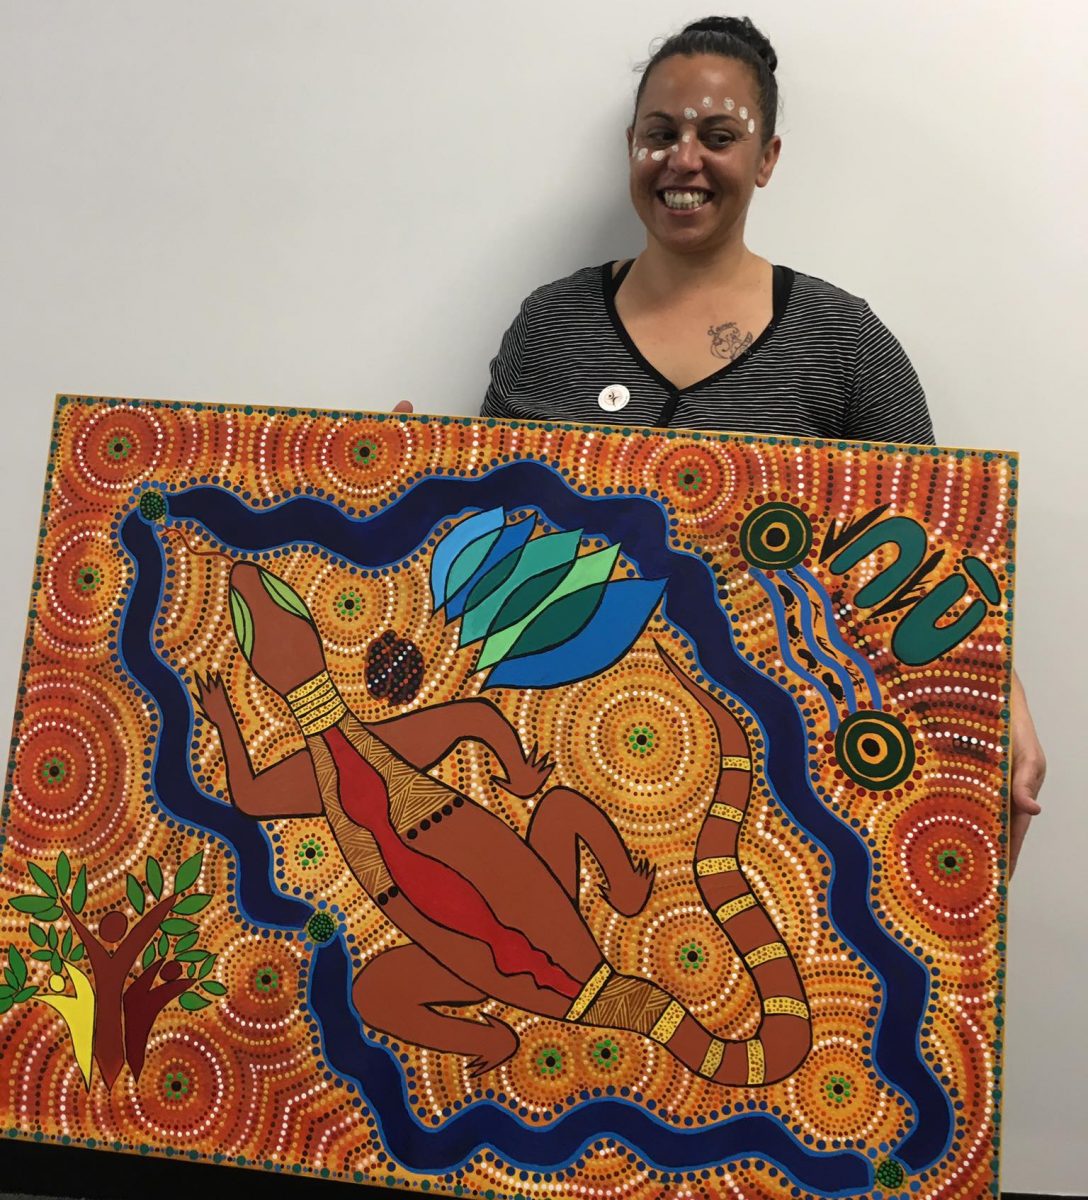 Wagga local artist Jasmine Williams holding one of her paintings